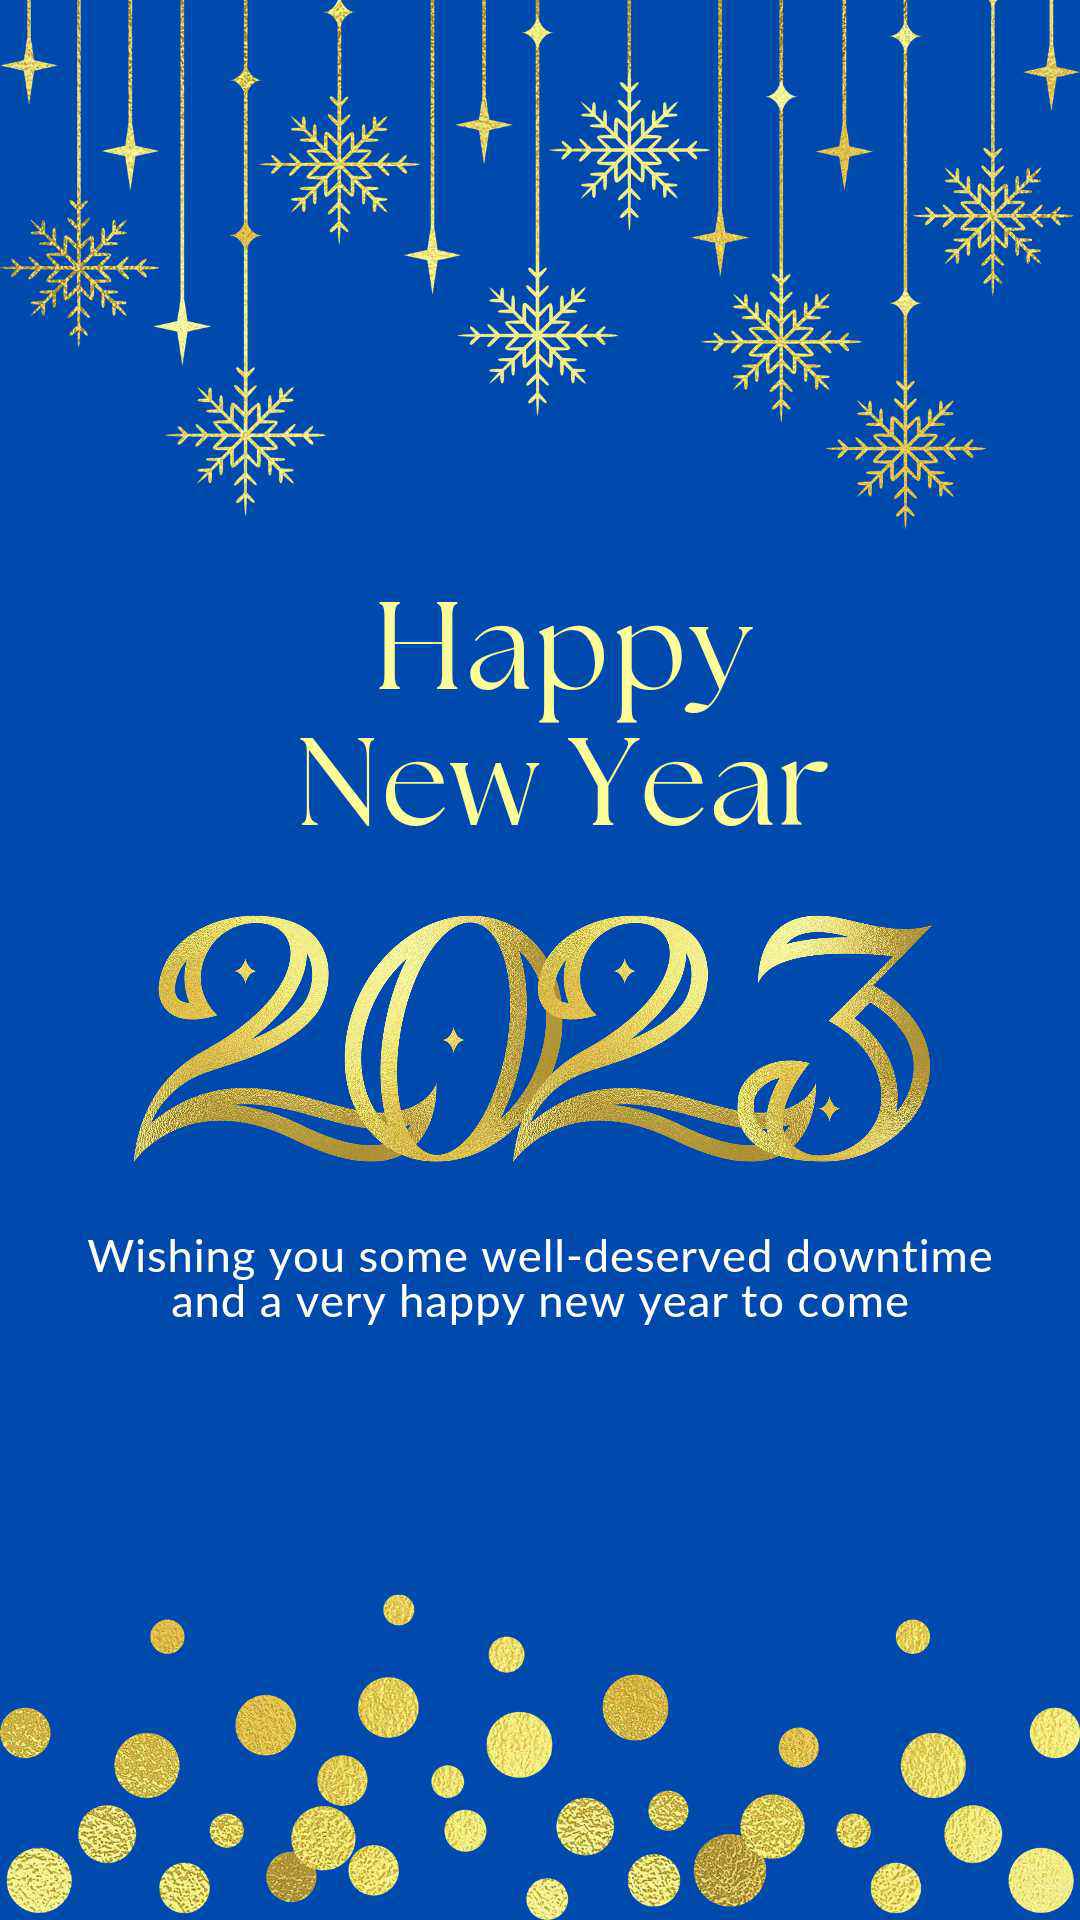 Happy New Year 2023 Wishes, Poetry (Shayari in Urdu and Hindi), Quotes, Wishes